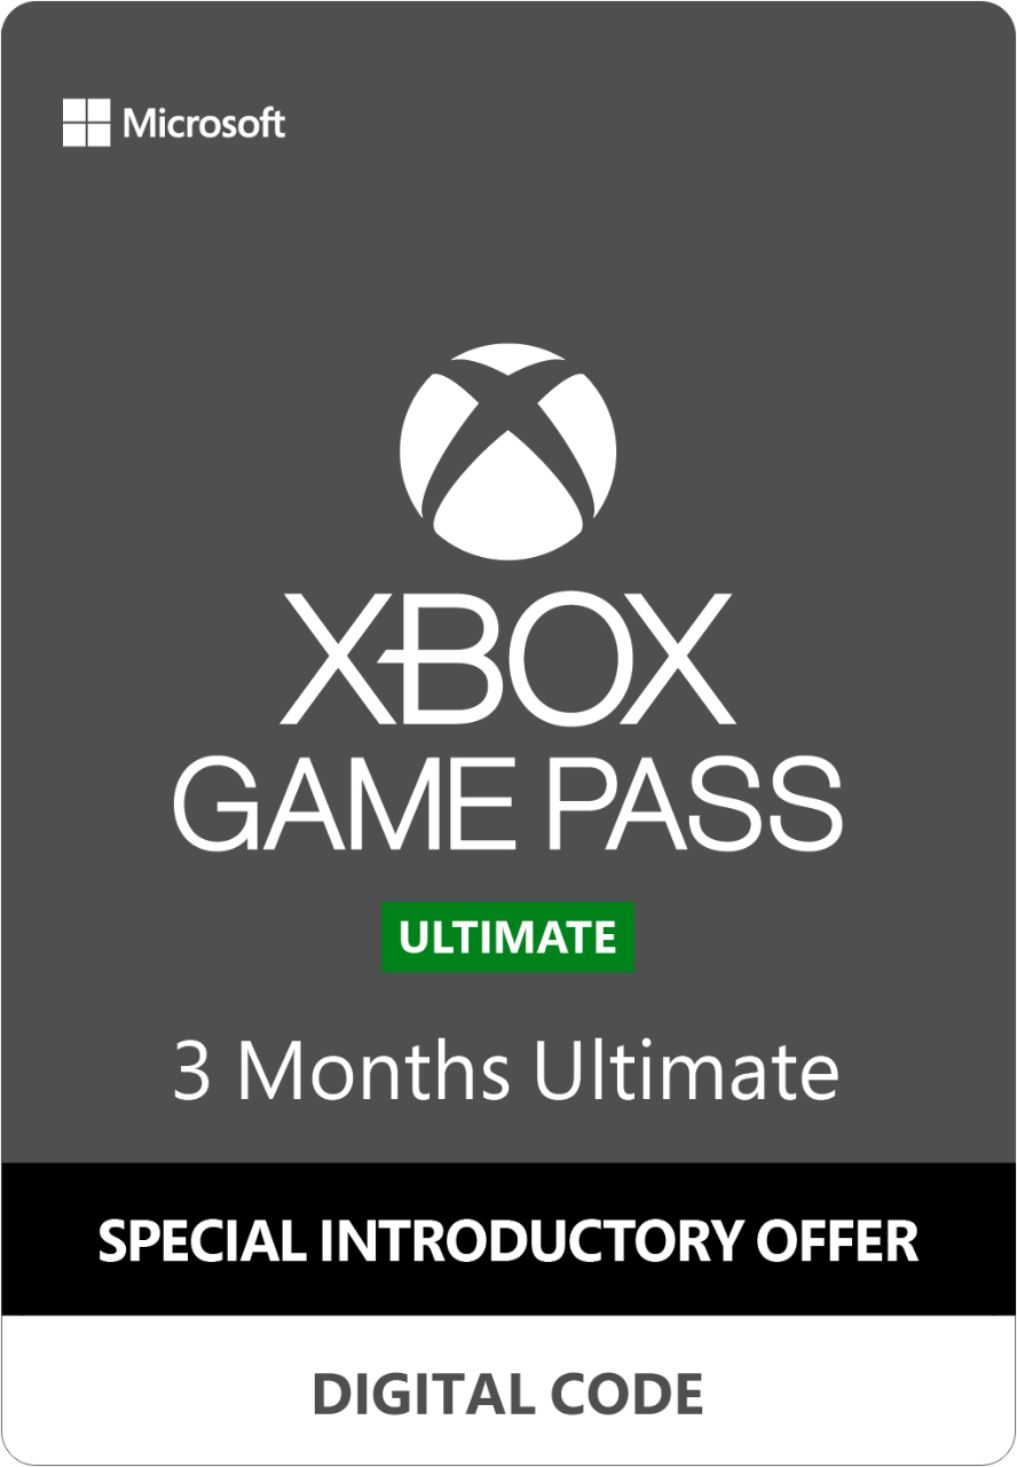 How to set up Xbox Game Pass Ultimate - Tech Tips from Best Buy